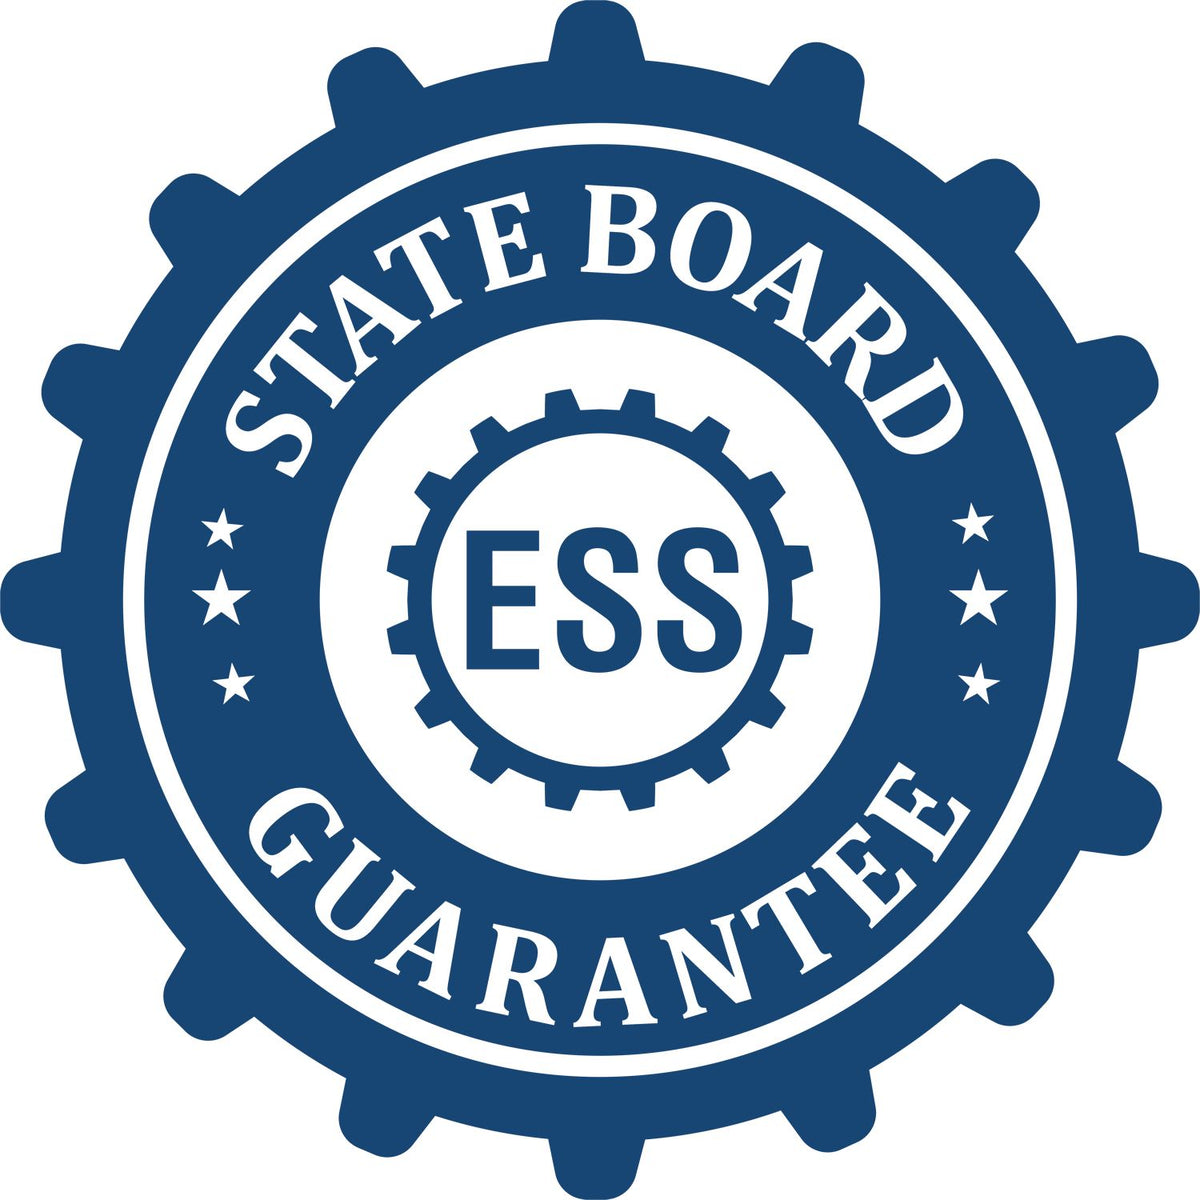 An emblem in a gear shape illustrating a state board guarantee for the Digital Arizona Landscape Architect Stamp product.